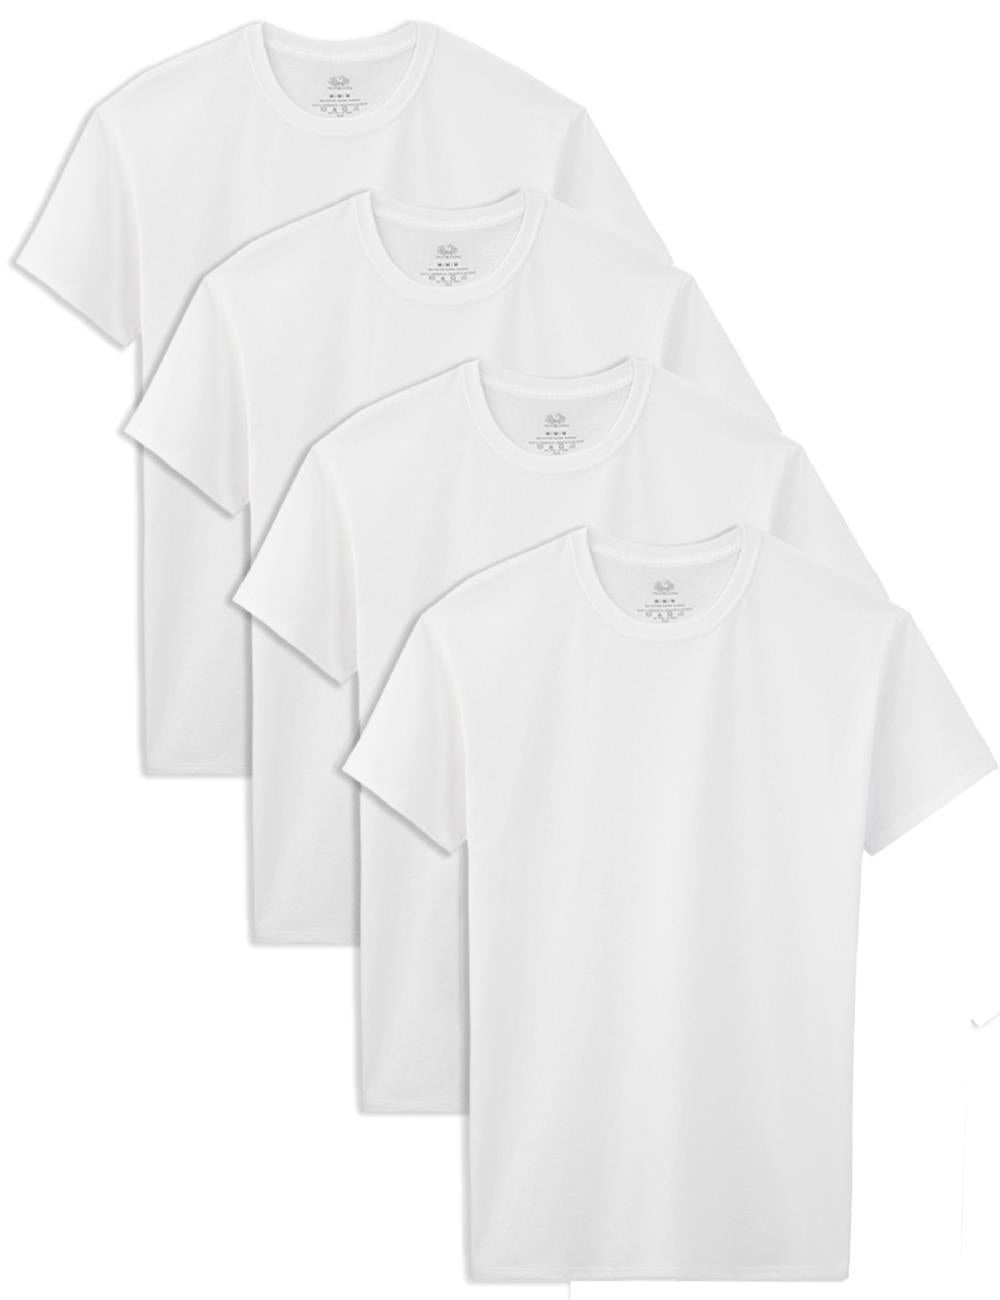 Fruit of the Loom Boys Crew T-Shirt - 4 Pack